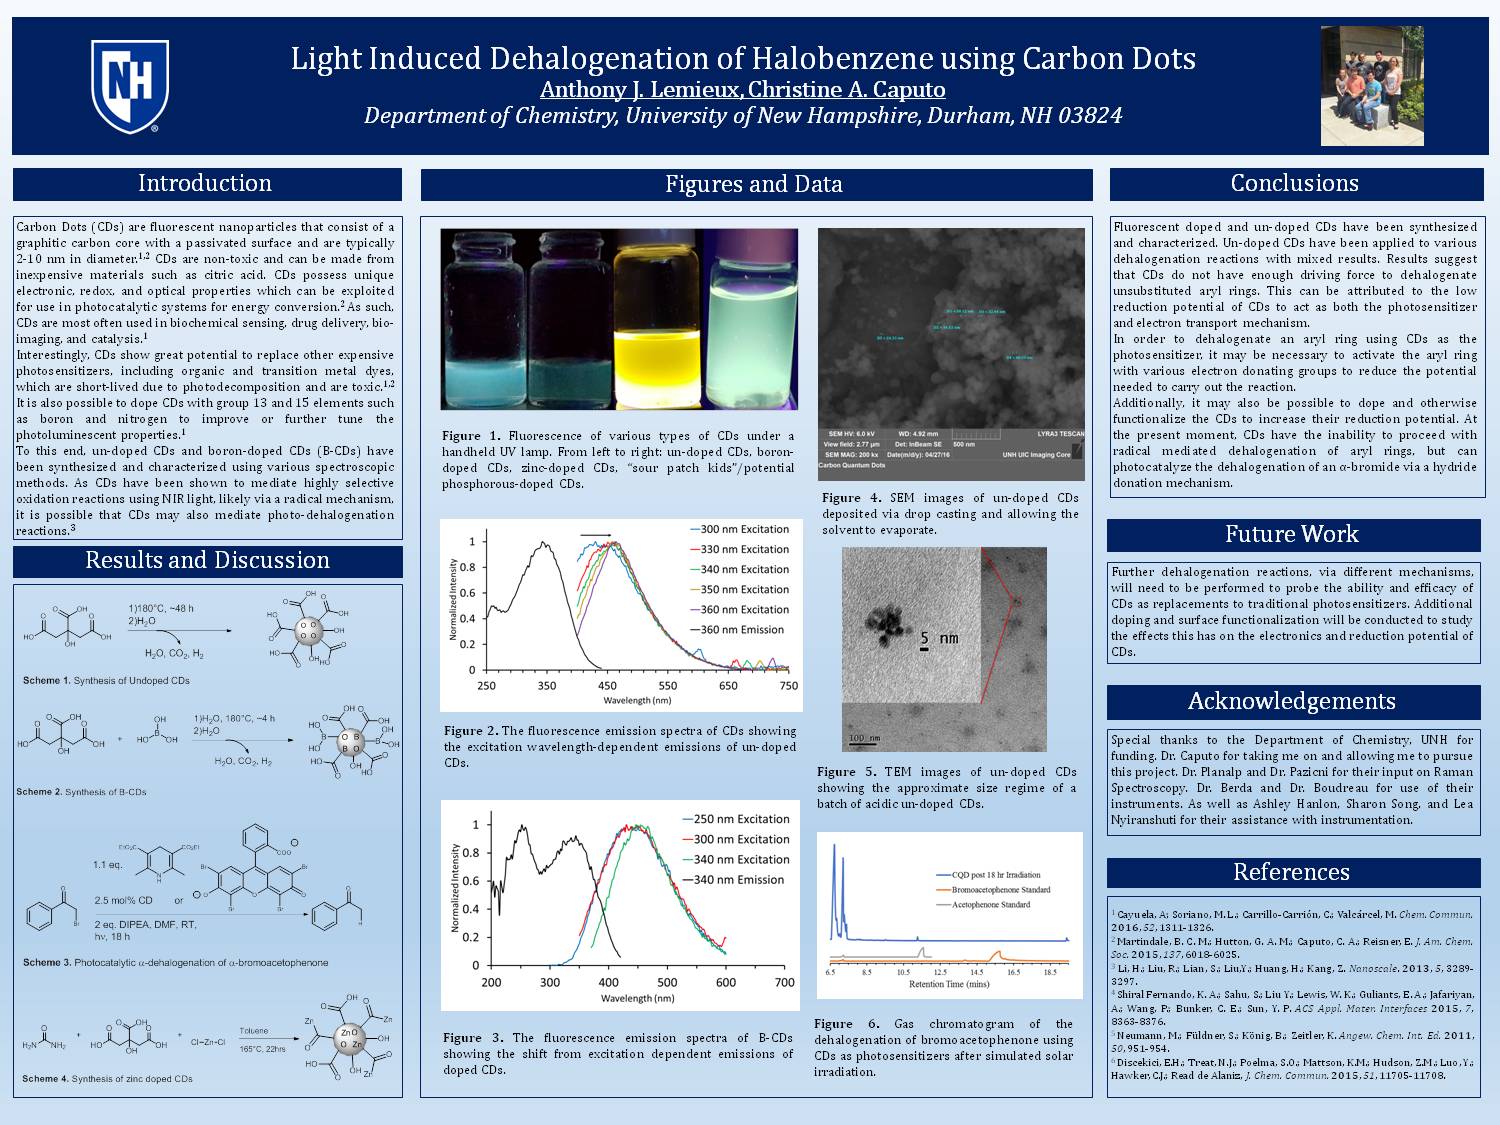 Light Induced Dehalogenation Of Halobenzene Using Carbon Dots by Al2007